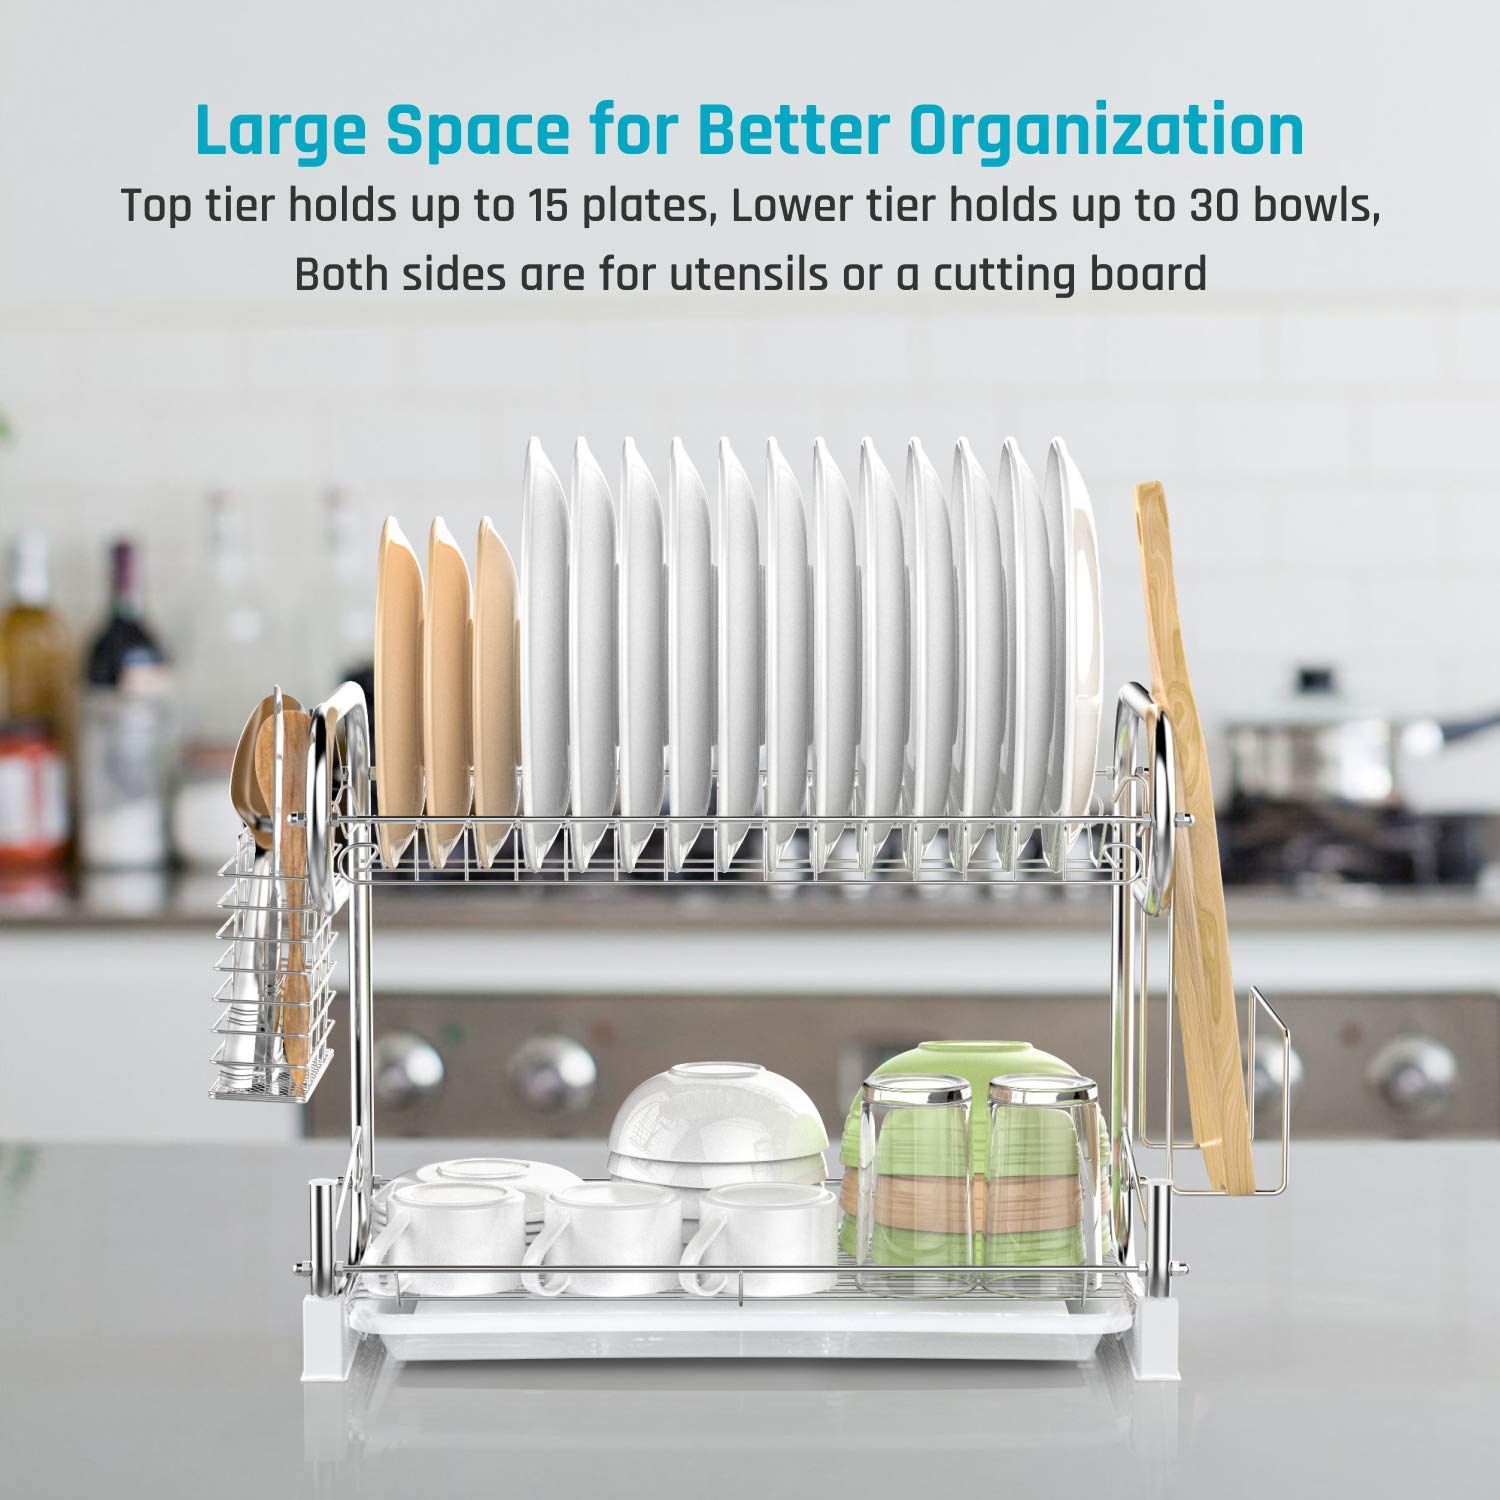 Dropship Dish Drying Rack 2 Tier Metal Kitchen Dish Rack With Utensil  Holder Dish Drainers And Drainboard Sink Rack For Dishes to Sell Online at  a Lower Price